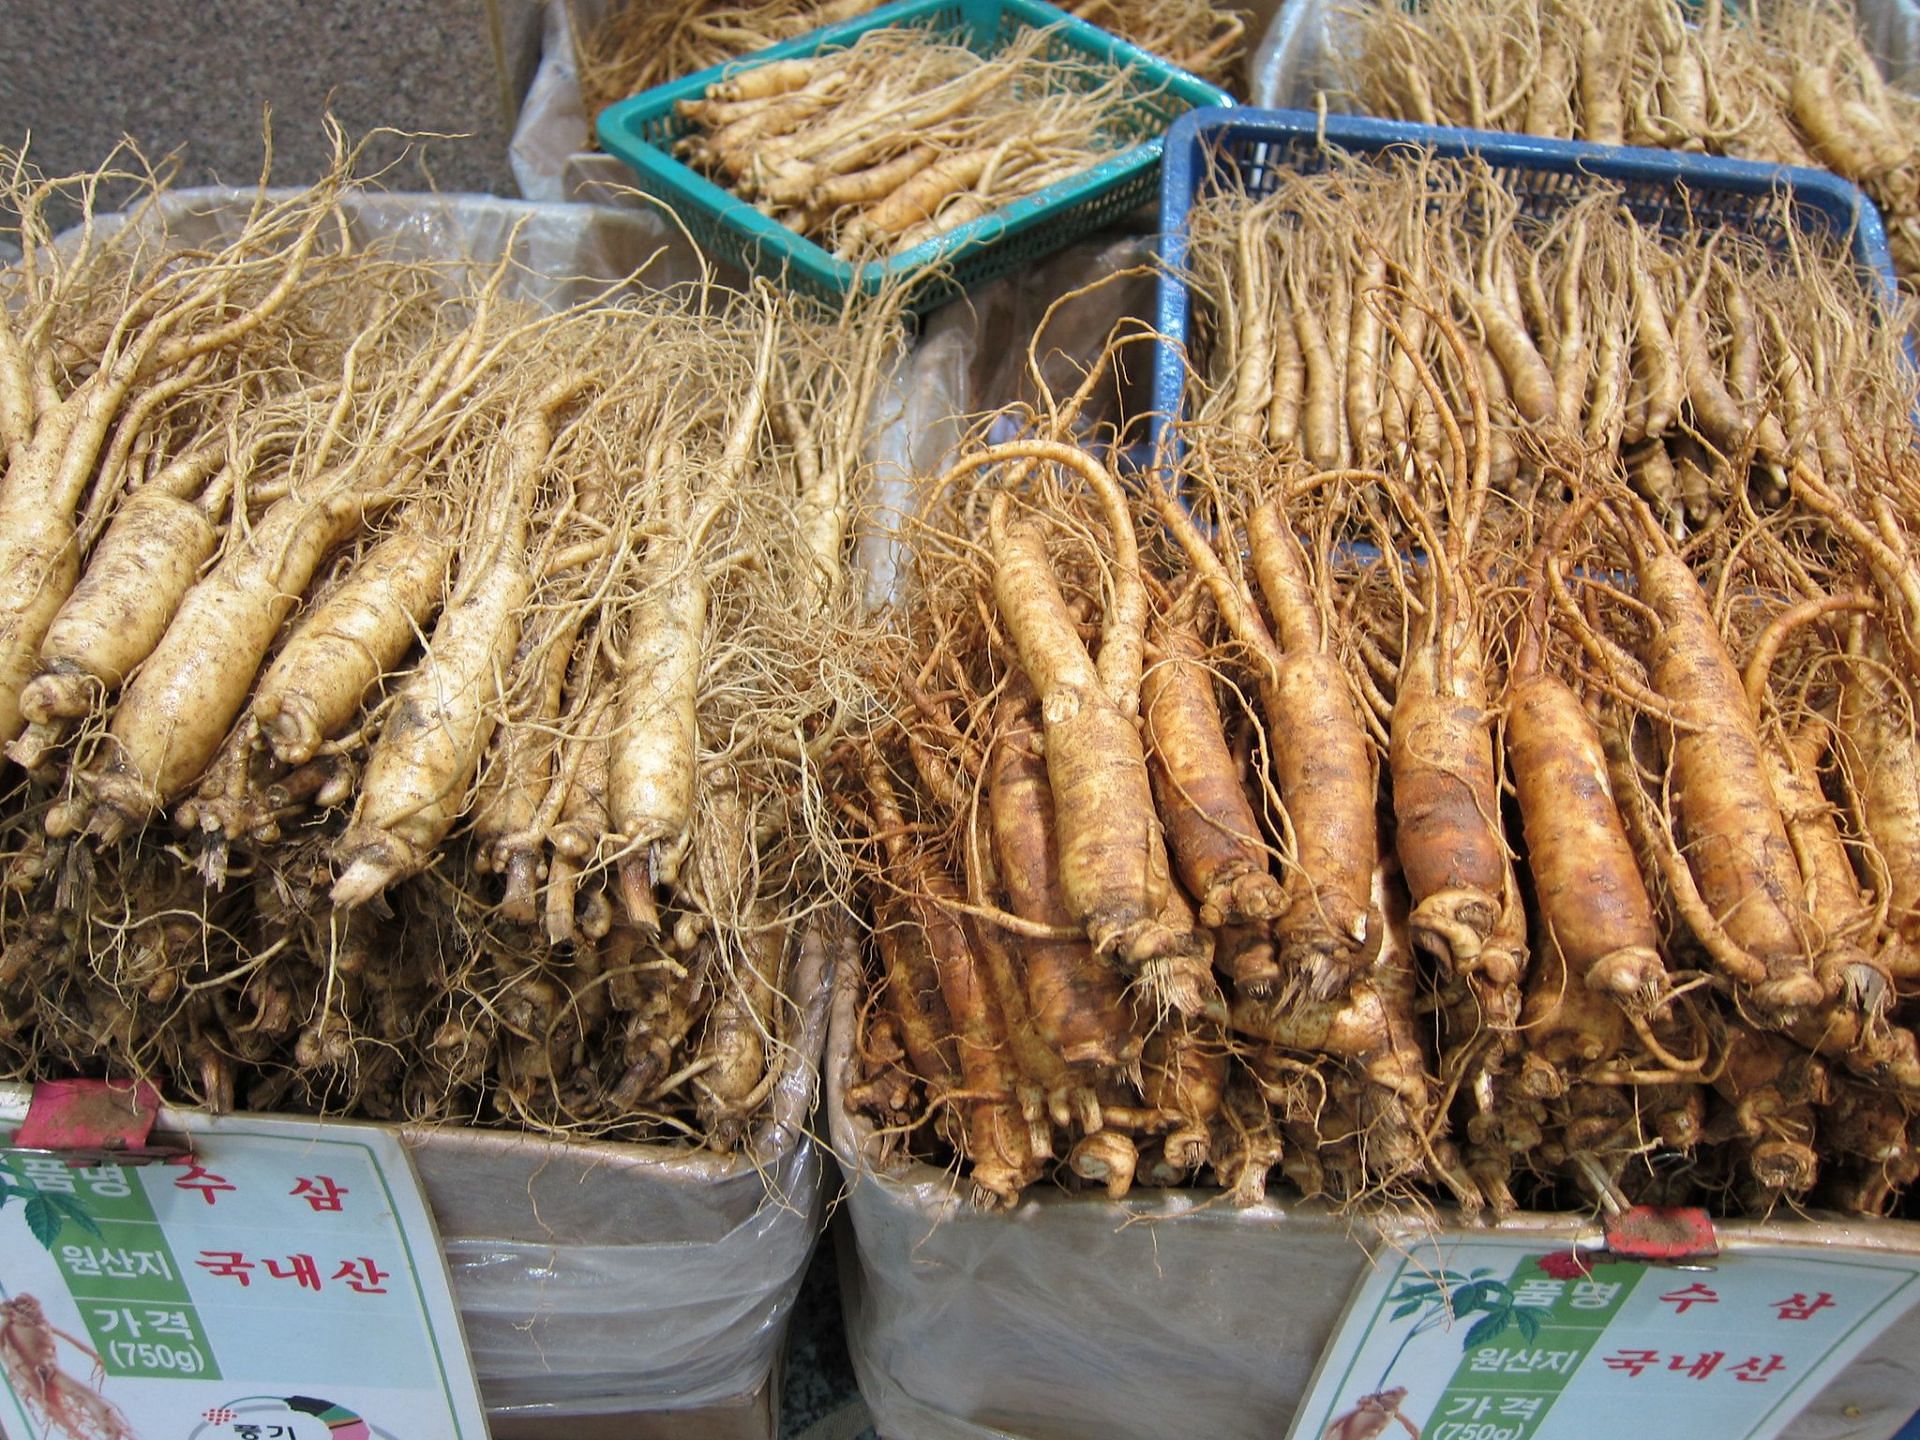 Red ginseng is the root of a plant that is harvested for its amazing health benefits (Image via Flickr)